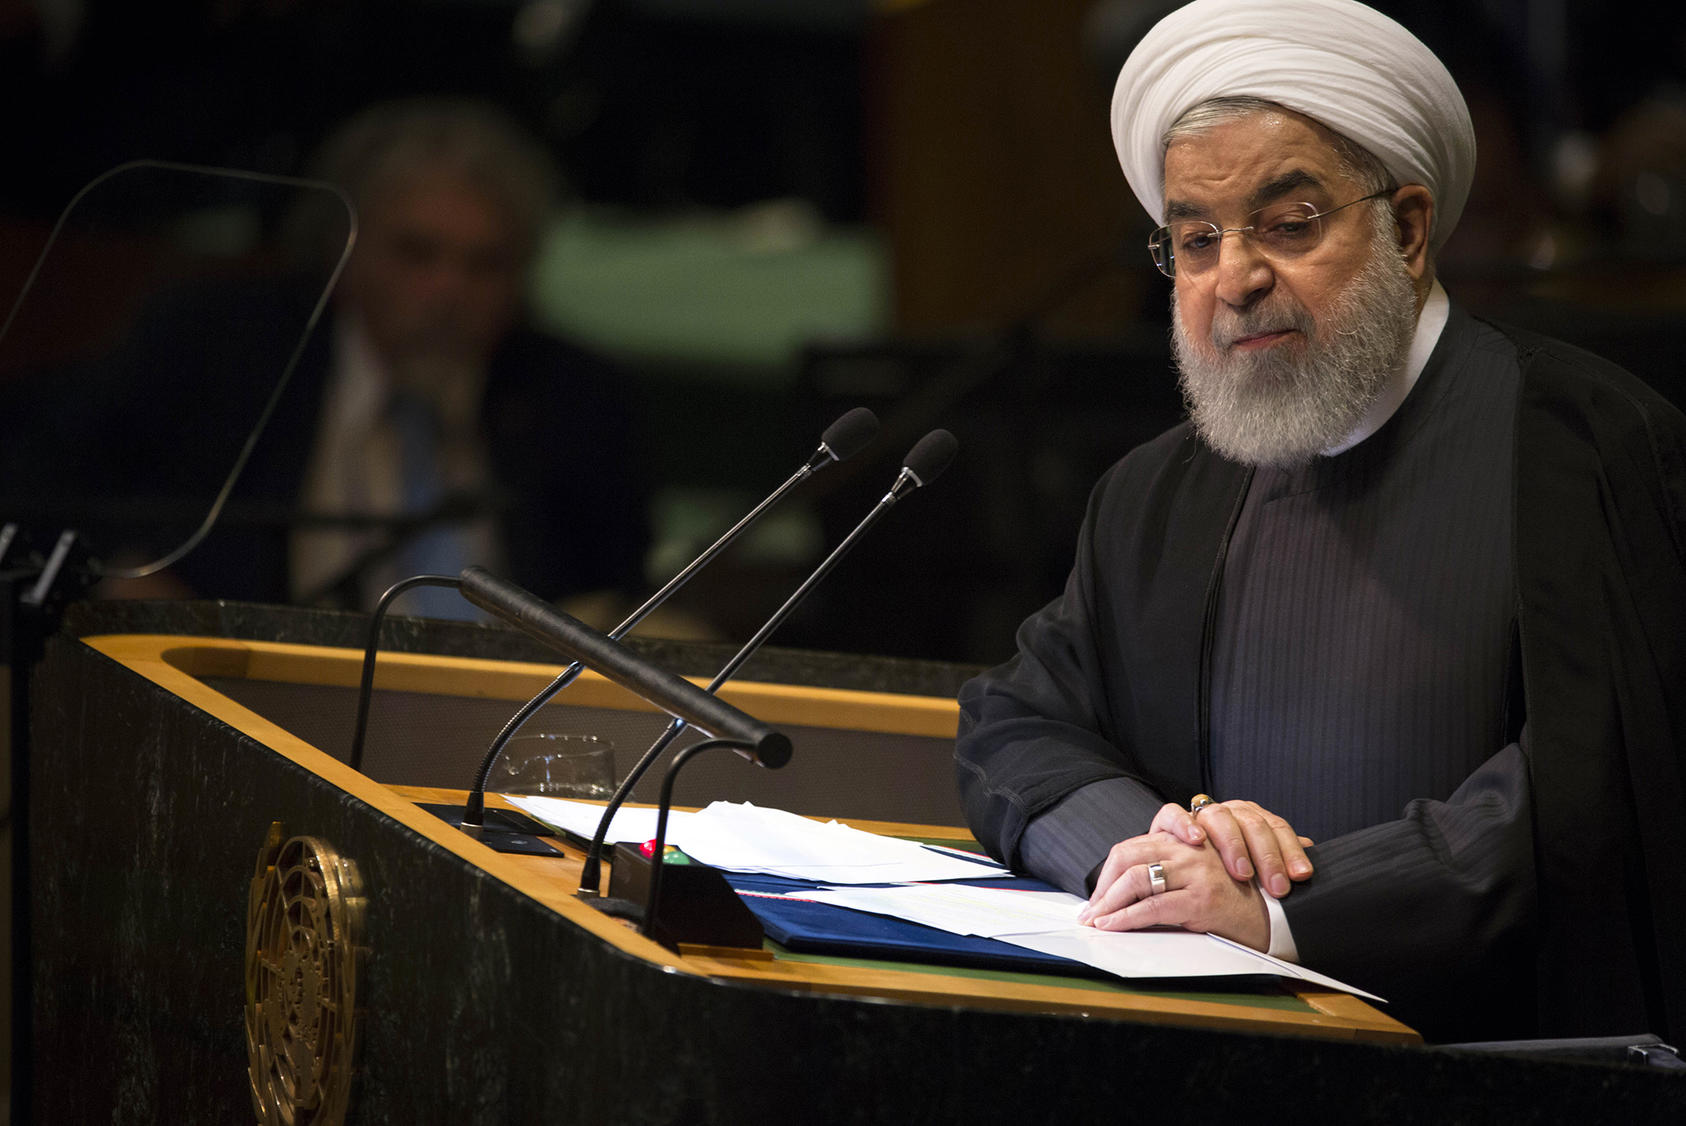  President Hassan Rouhani of Iran addresses the U.N. General Assembly at U.N. headquarters in New York on Tuesday, Sept. 25, 2018. (Dave Sanders/The New York Times)